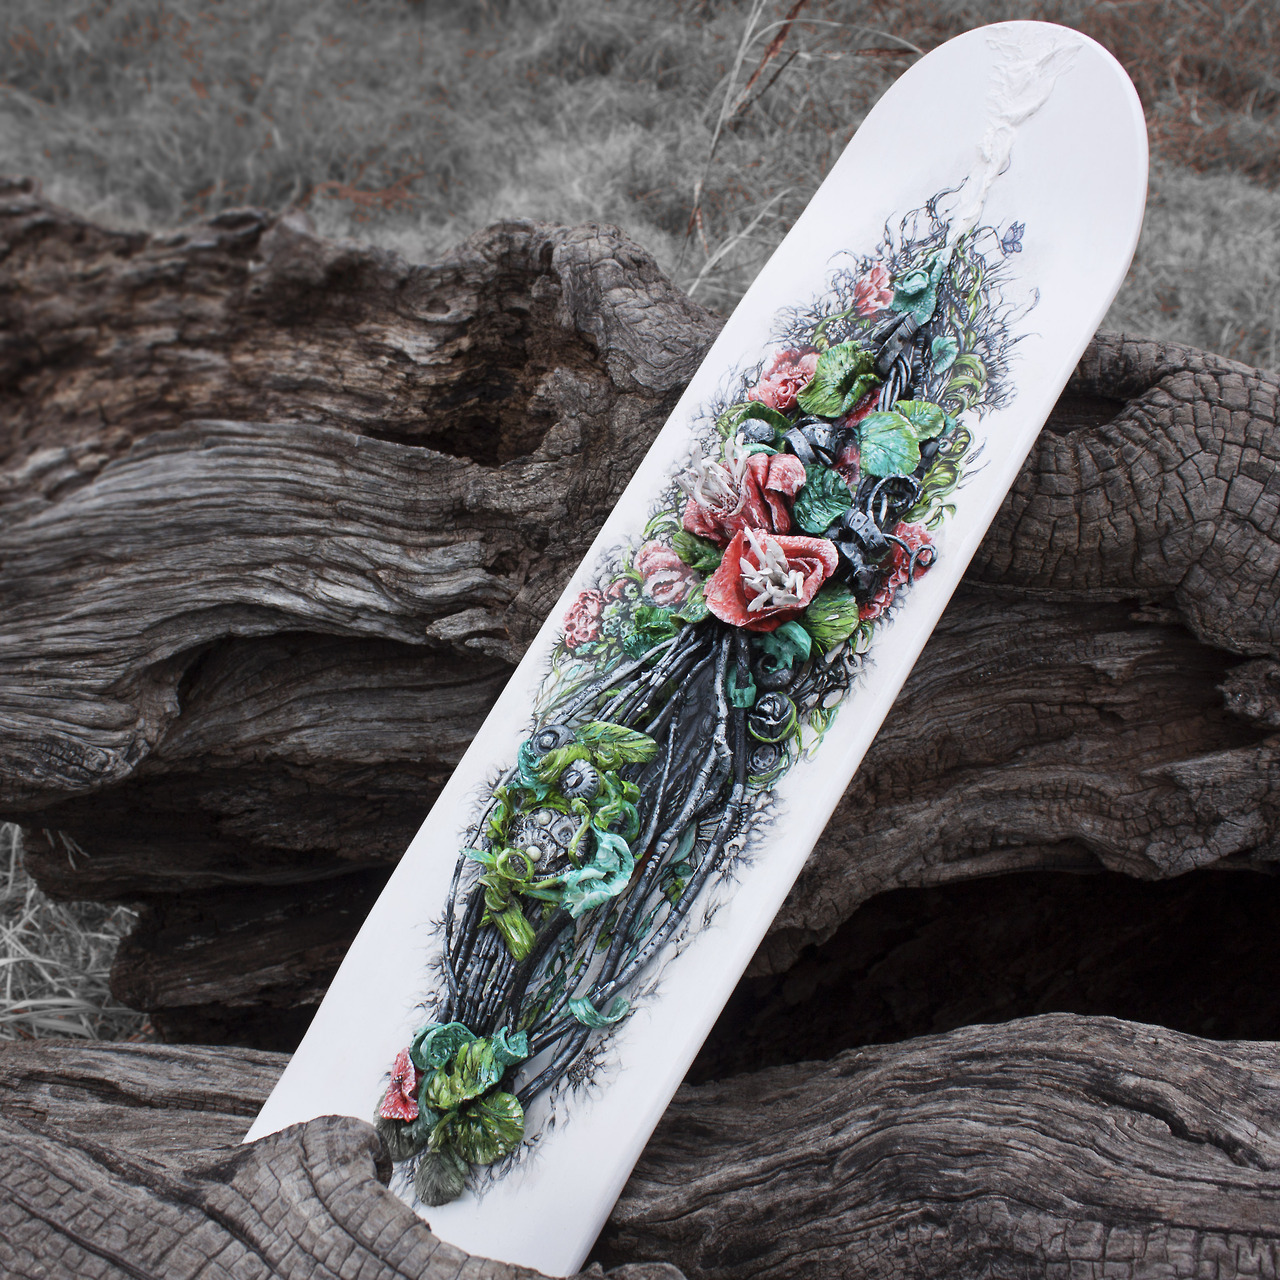 Hand Painted & Sculpted Skate Deck. Acrylic, Ink, Clay and Charcoal on Wood Skate Deck https://www.instagram.com/akorganicabstracts — Immediately post your art to a topic and get feedback. Join our new community, EatSleepDraw Studio, today!